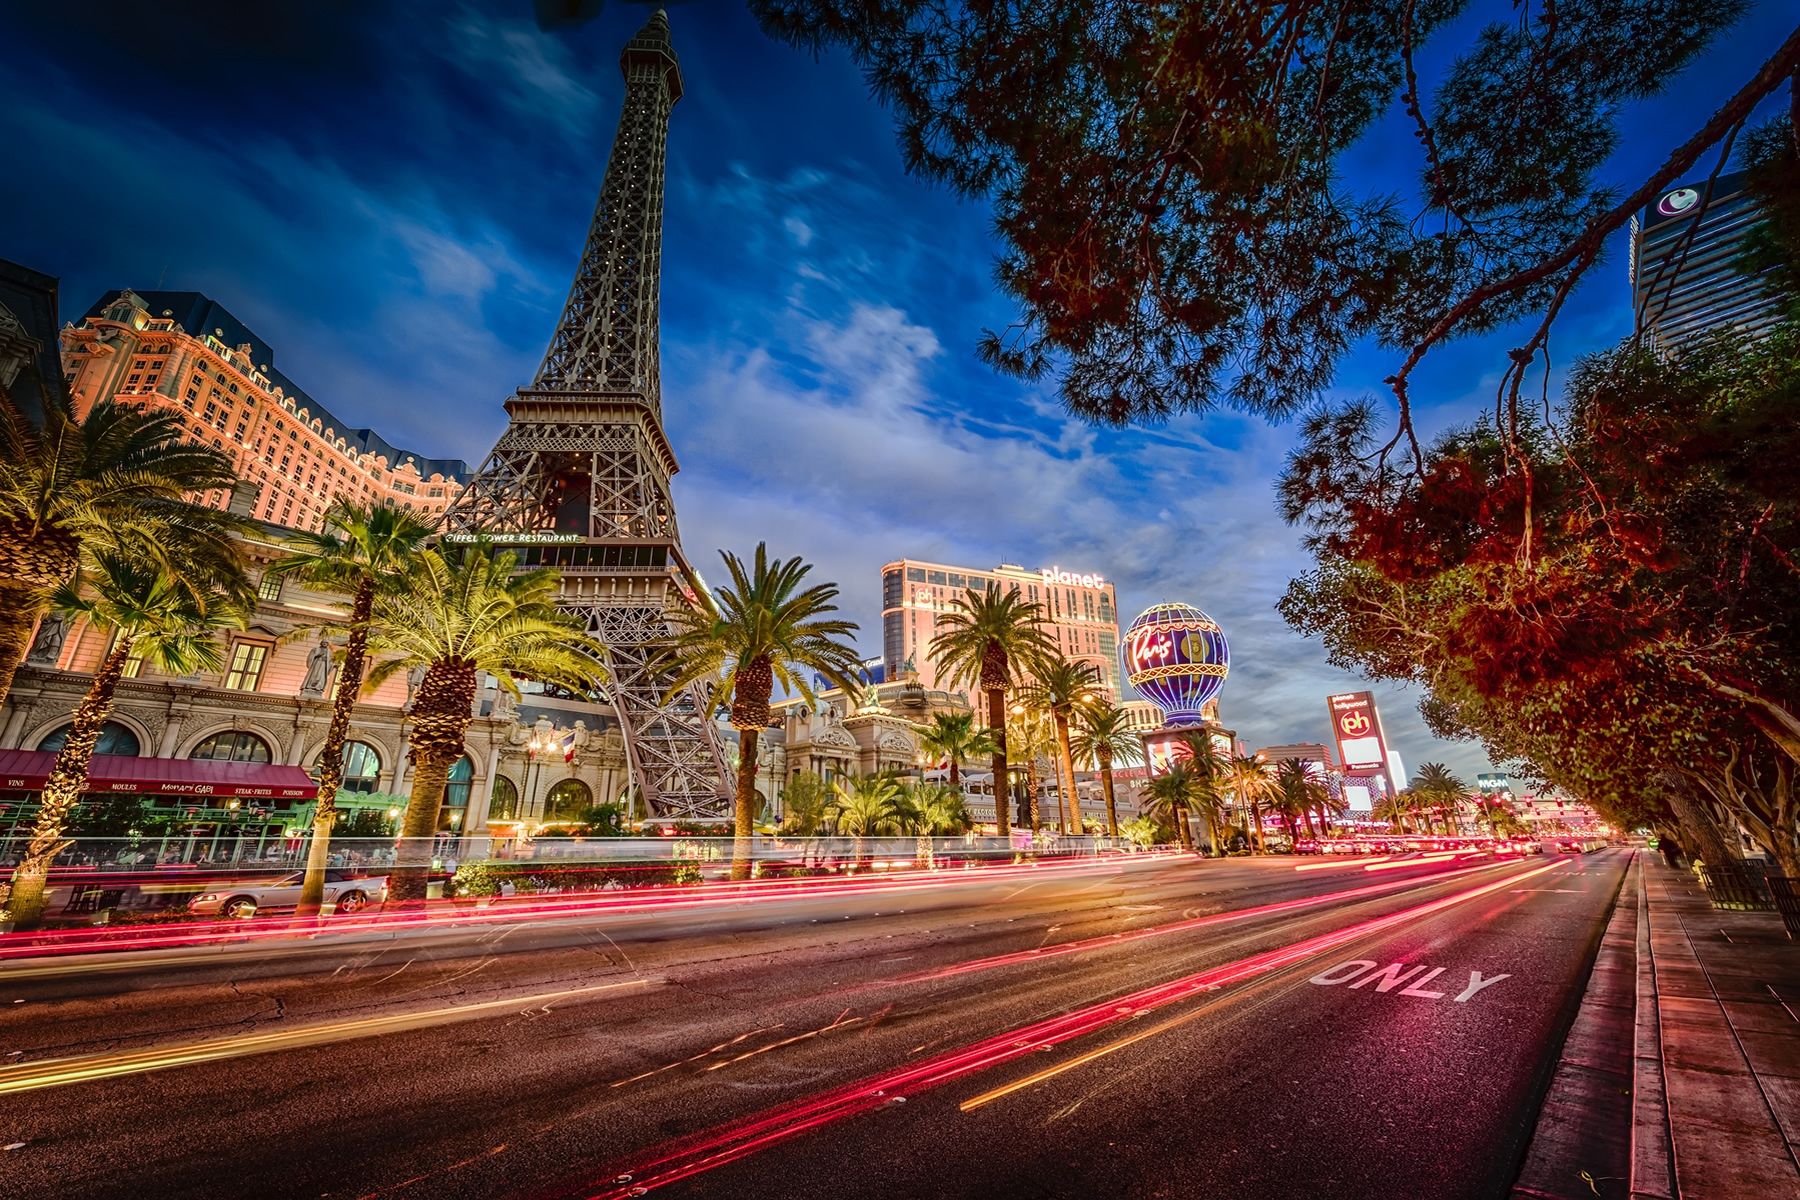 A city street with the eiffel tower in it - Las Vegas